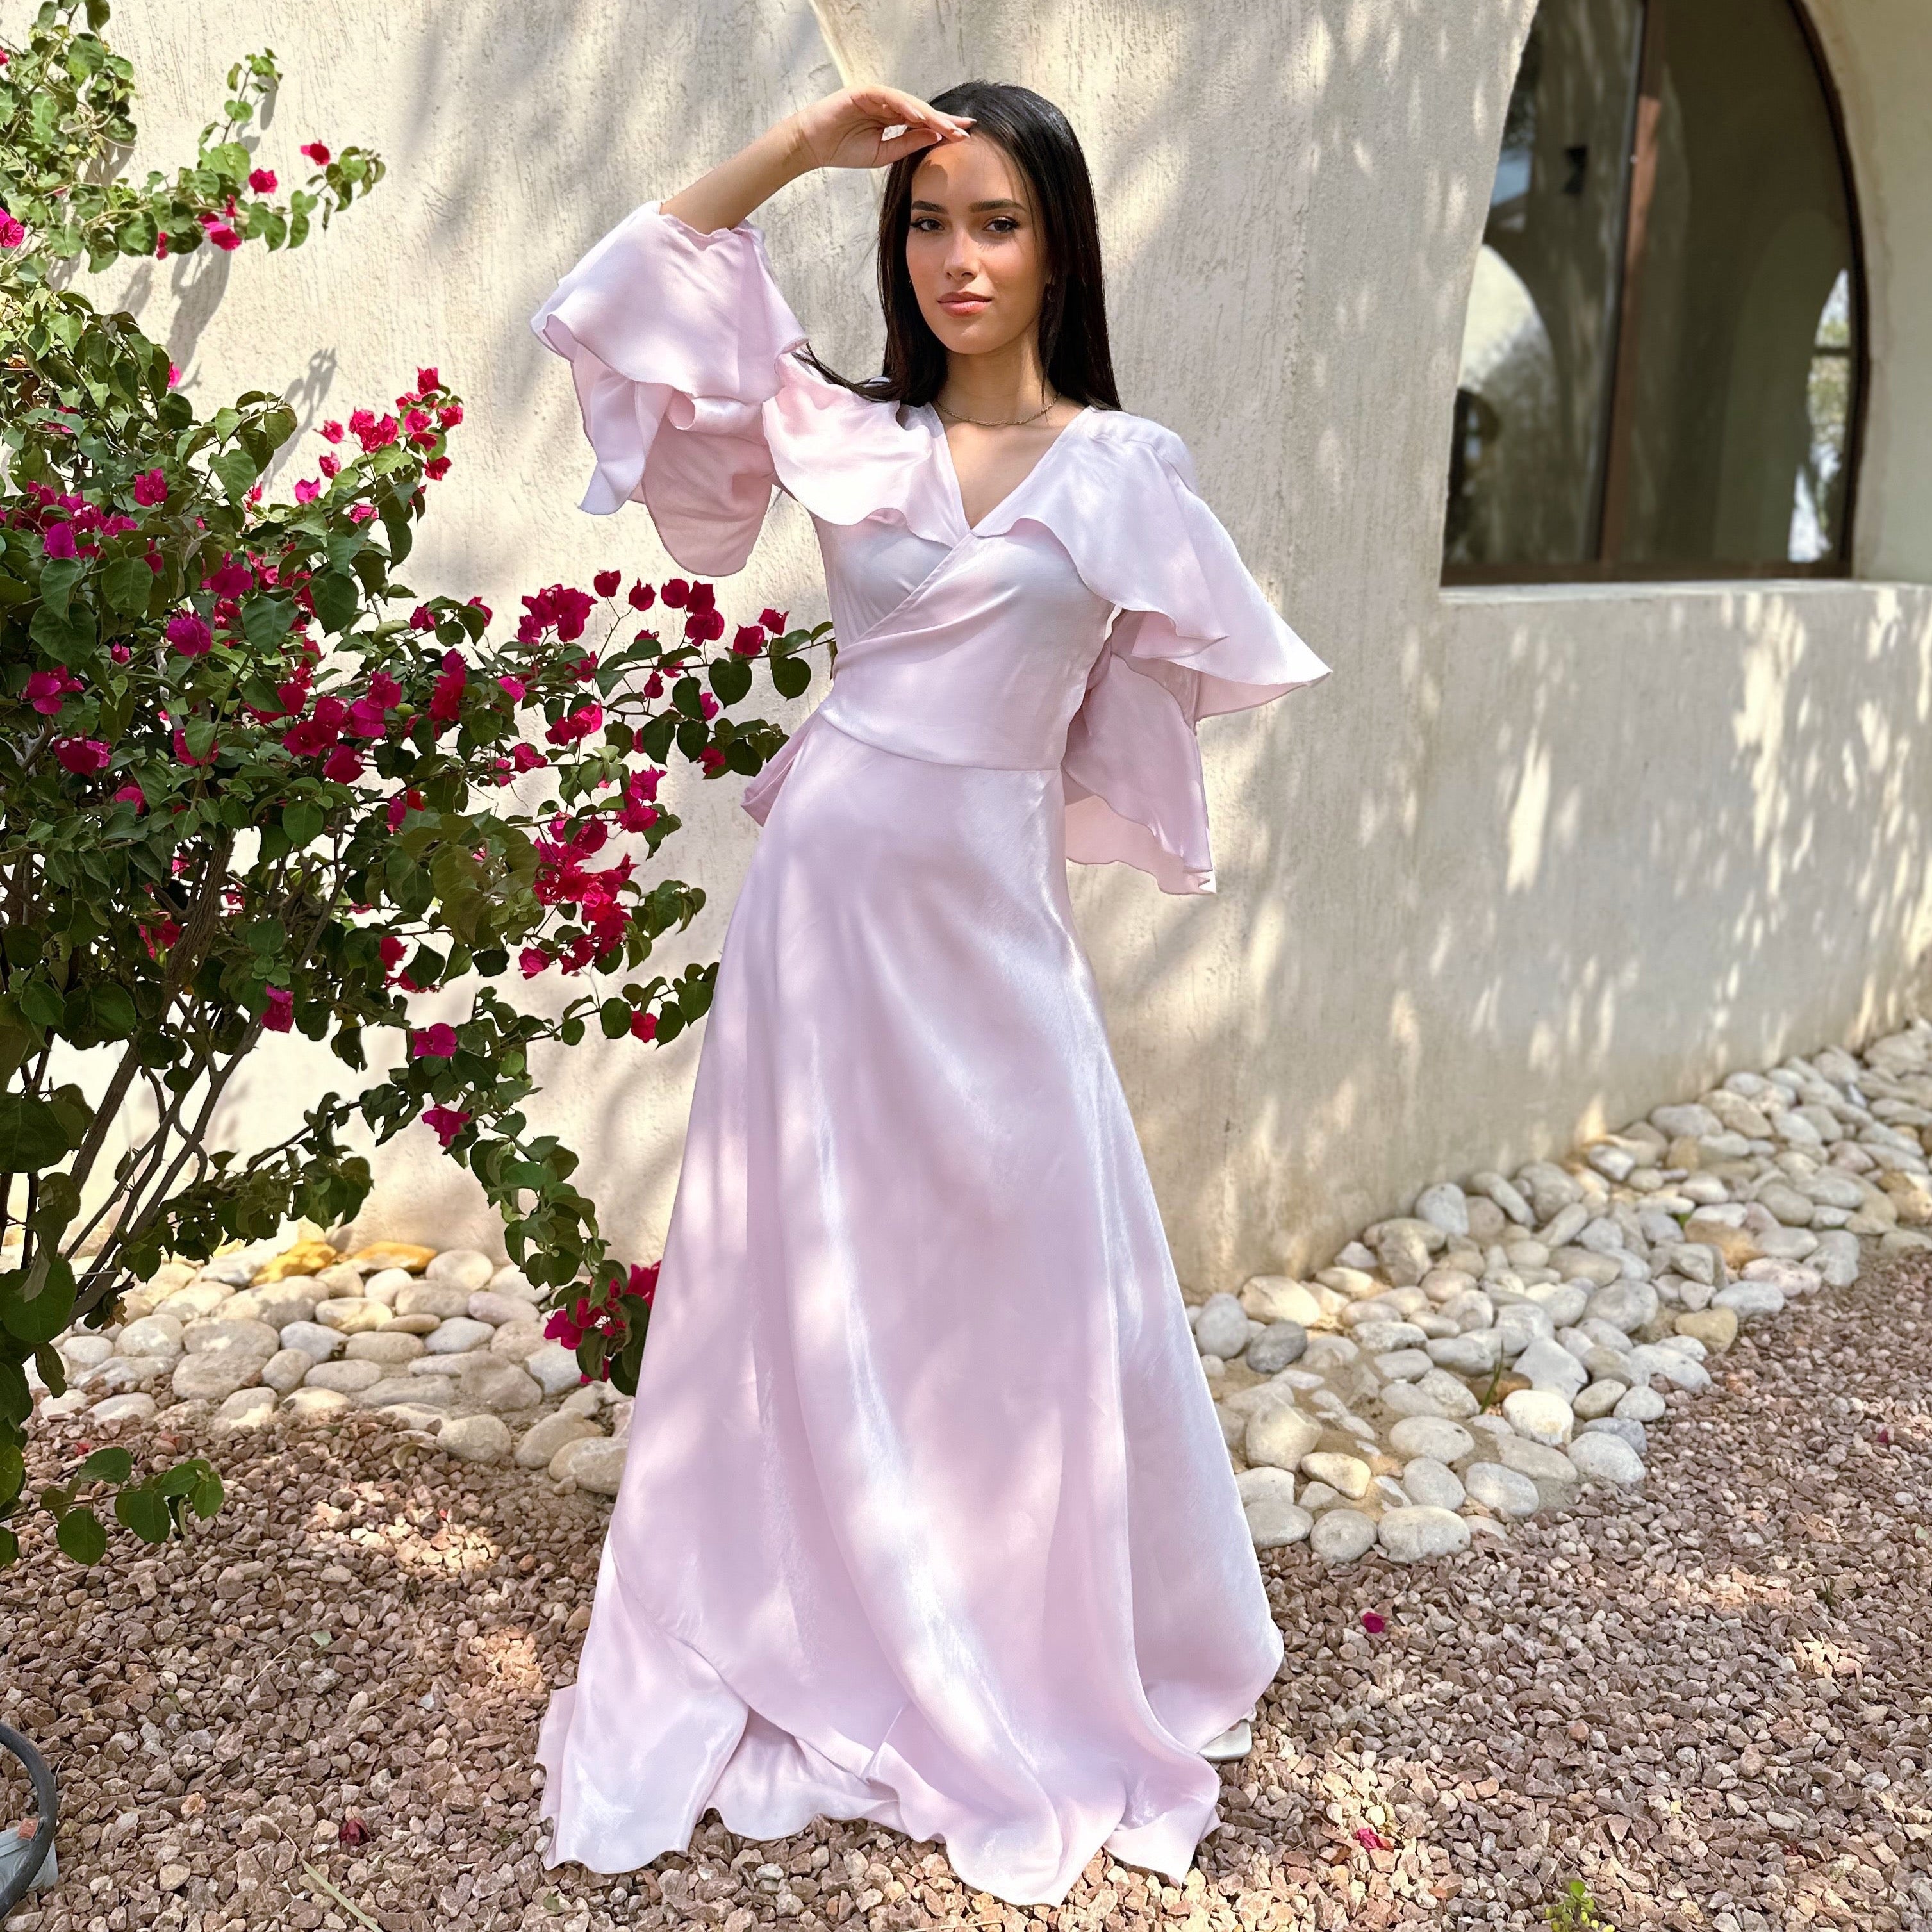 Ruffles wrapped dress in Pink – Safa ghaly